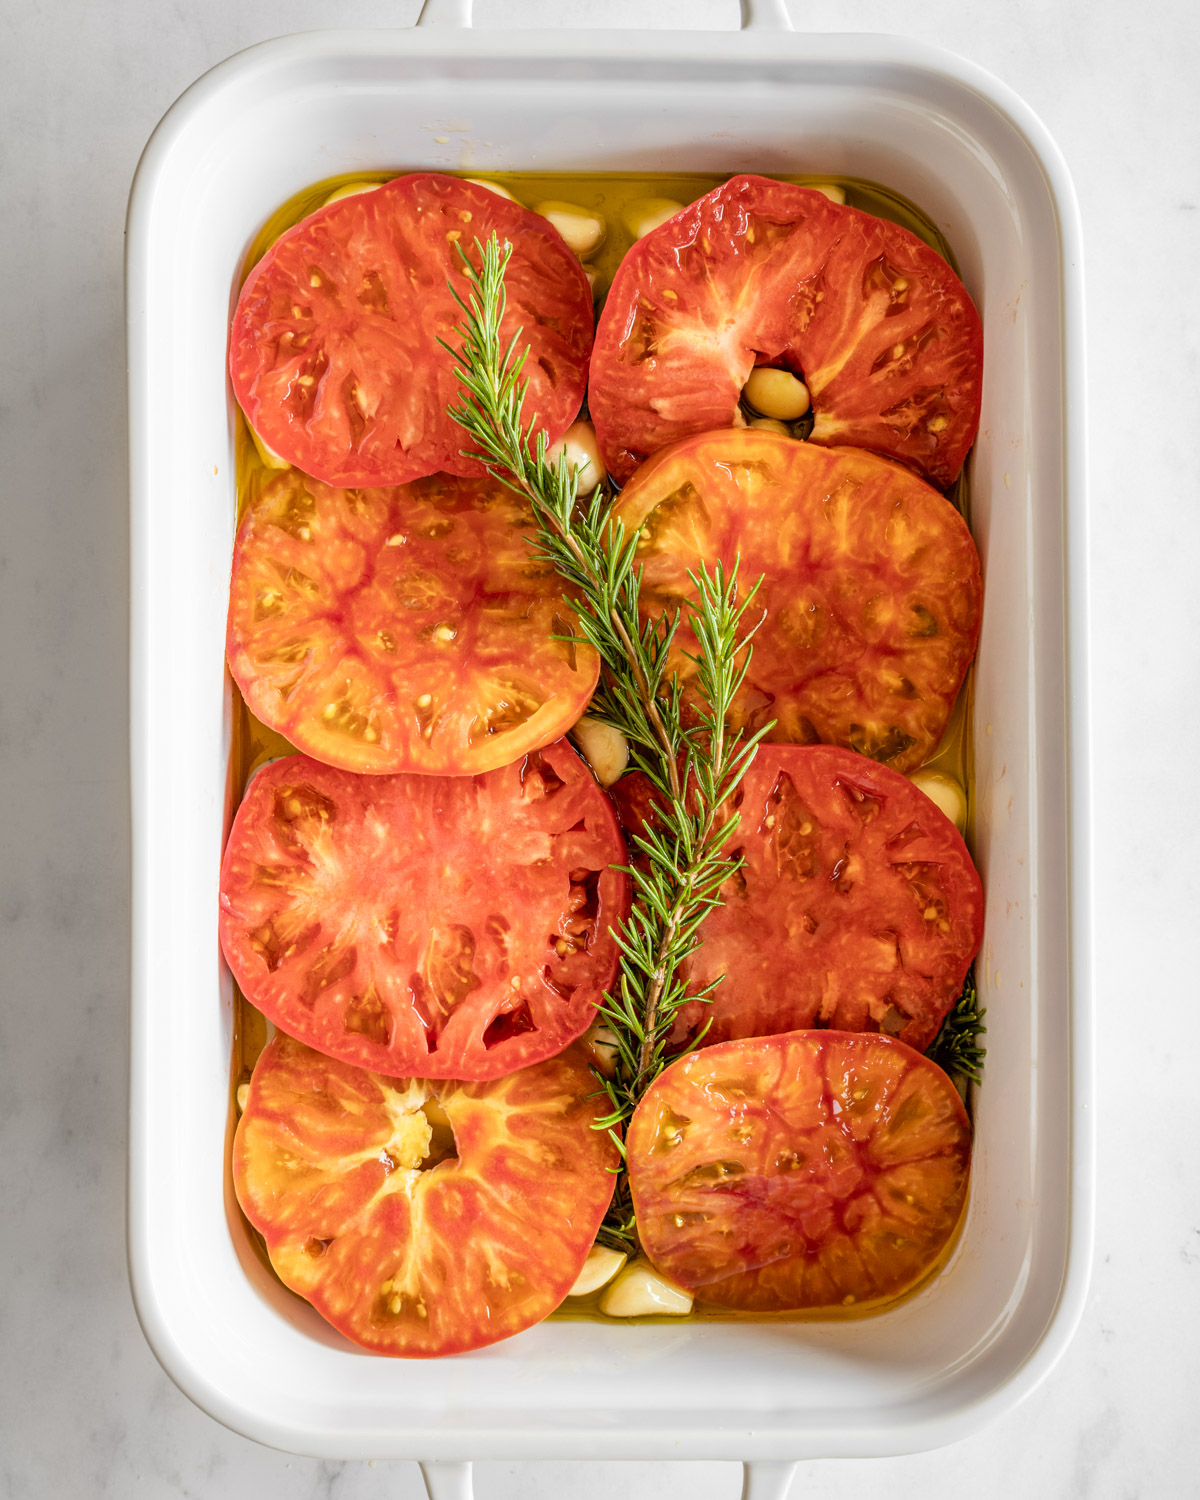 sliced tomatoes, garlic, and rosemary arranged in a white baking dish.